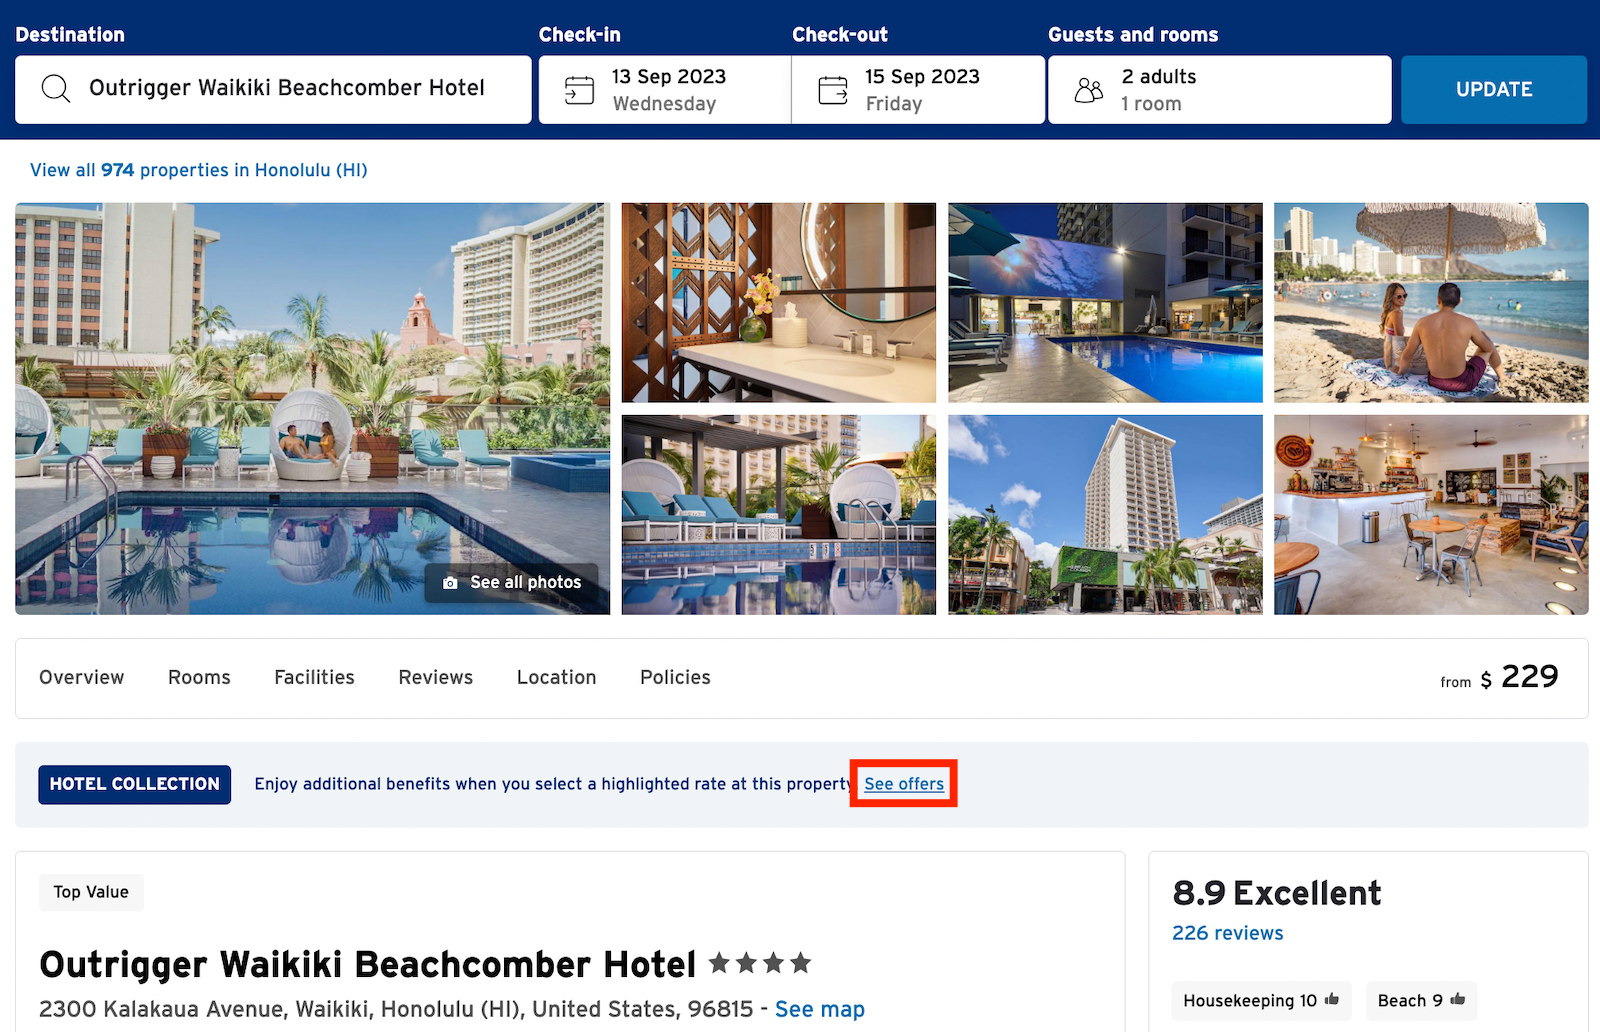 photos and details of a hotel in Waikiki flagged as part of Citi's Hotel Collection with extra benefits